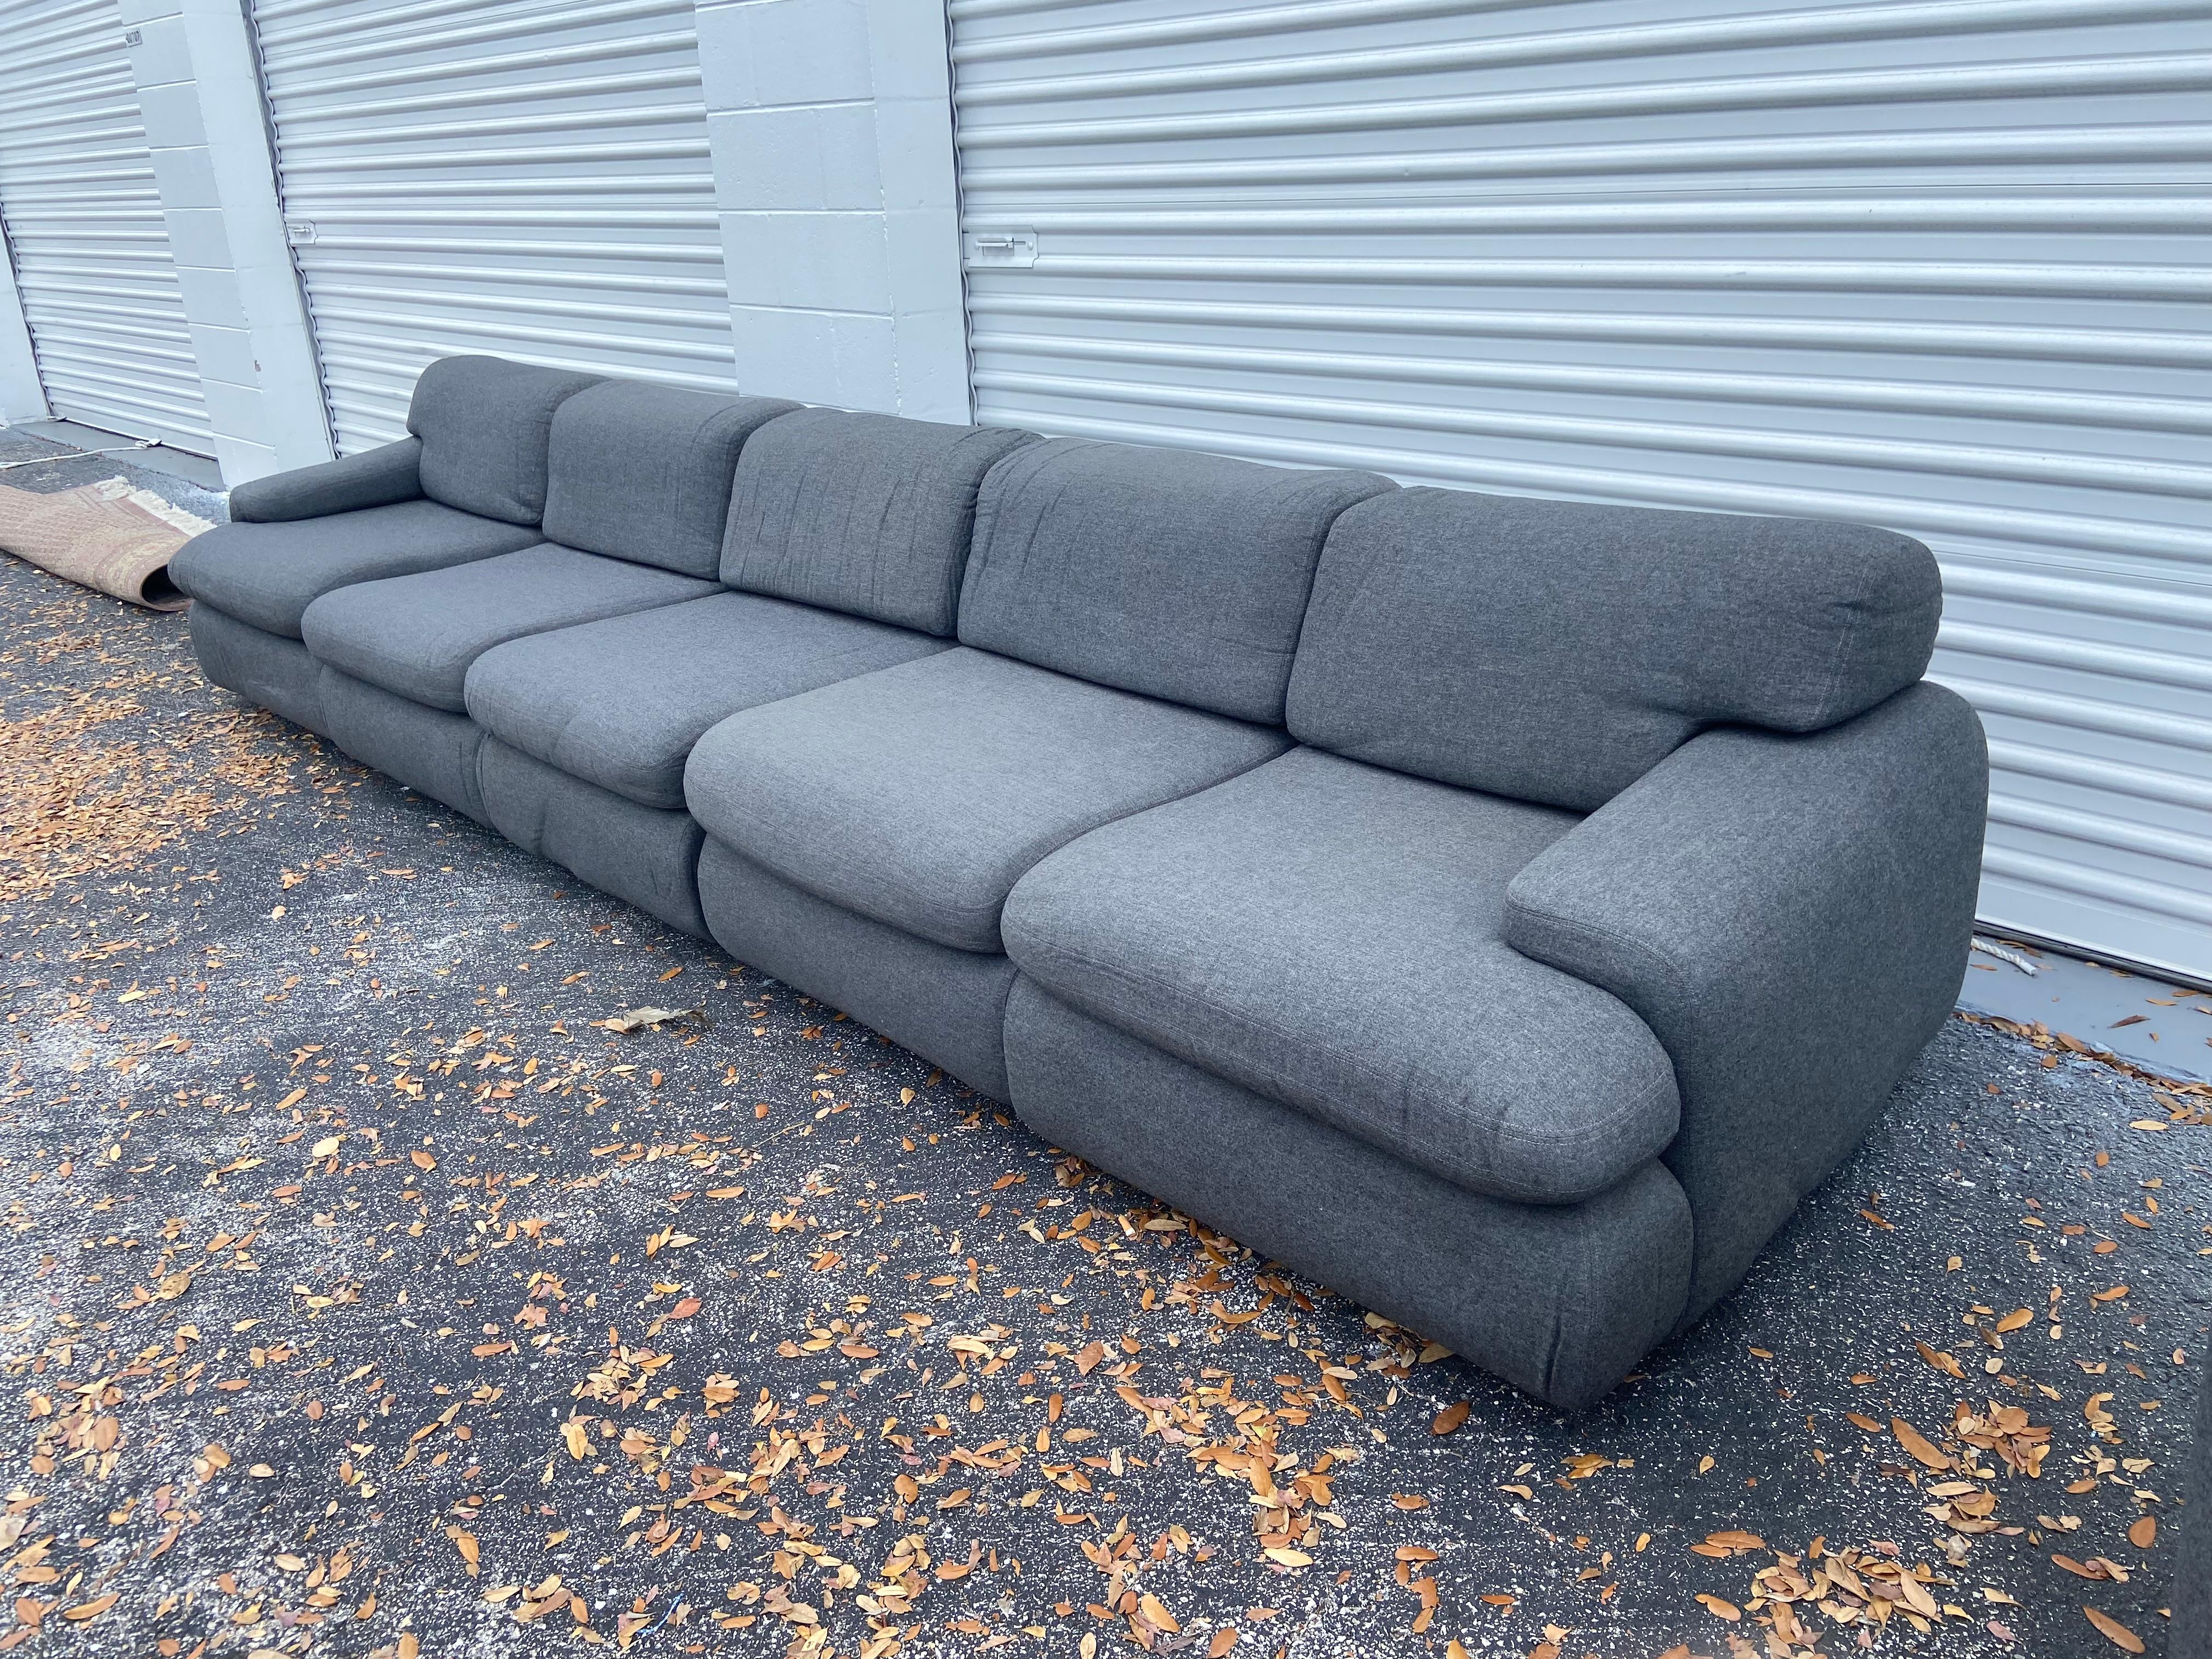 Modern Sectional SOFA New York Design Institute In Good Condition For Sale In Sarasota, FL